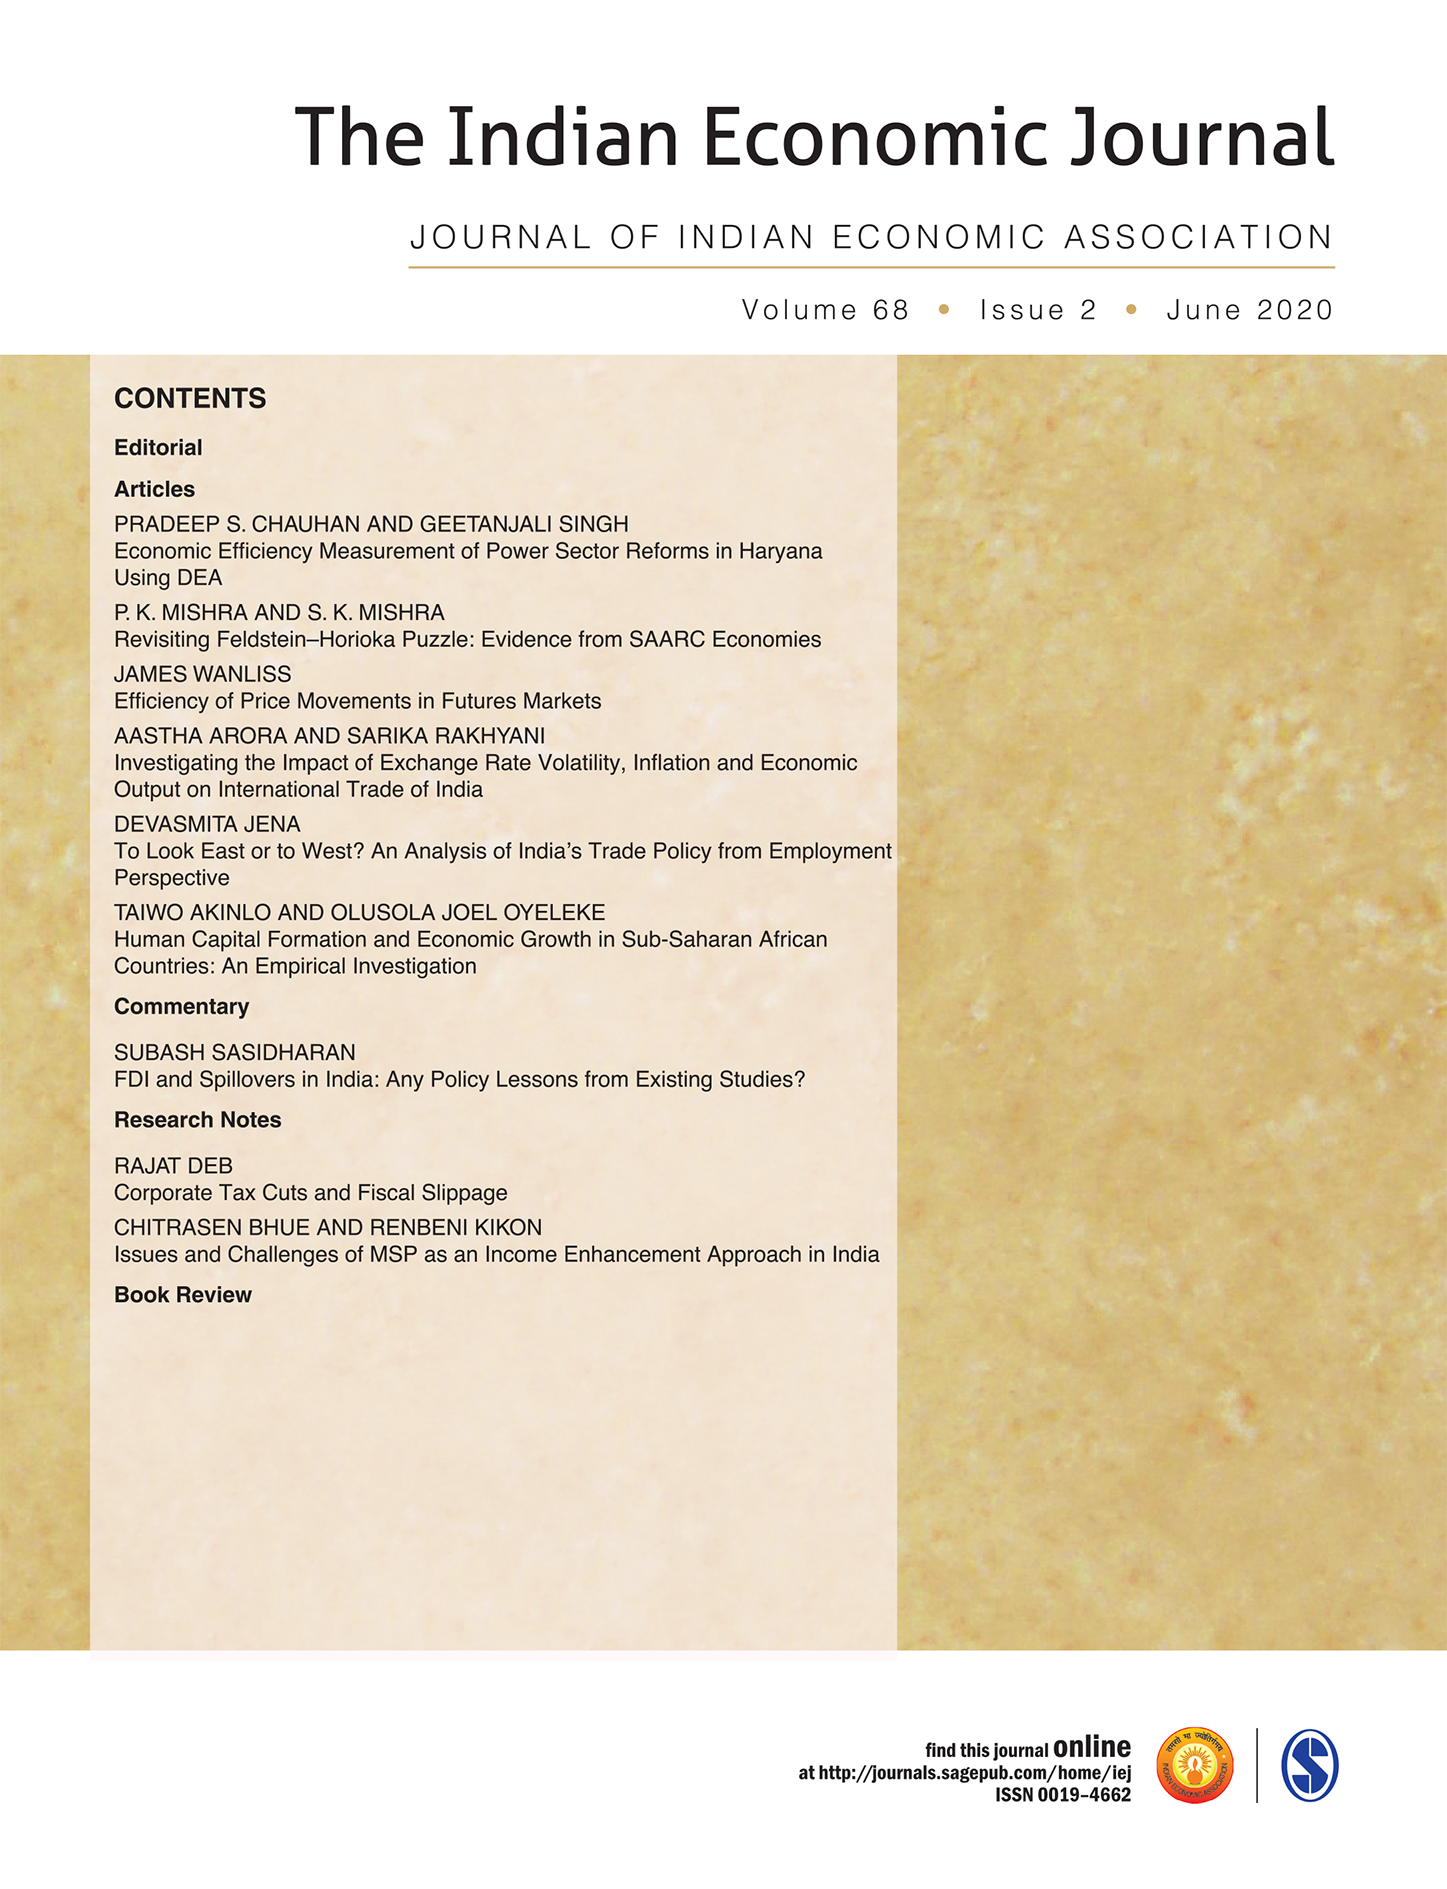 The Indian Economic Journal